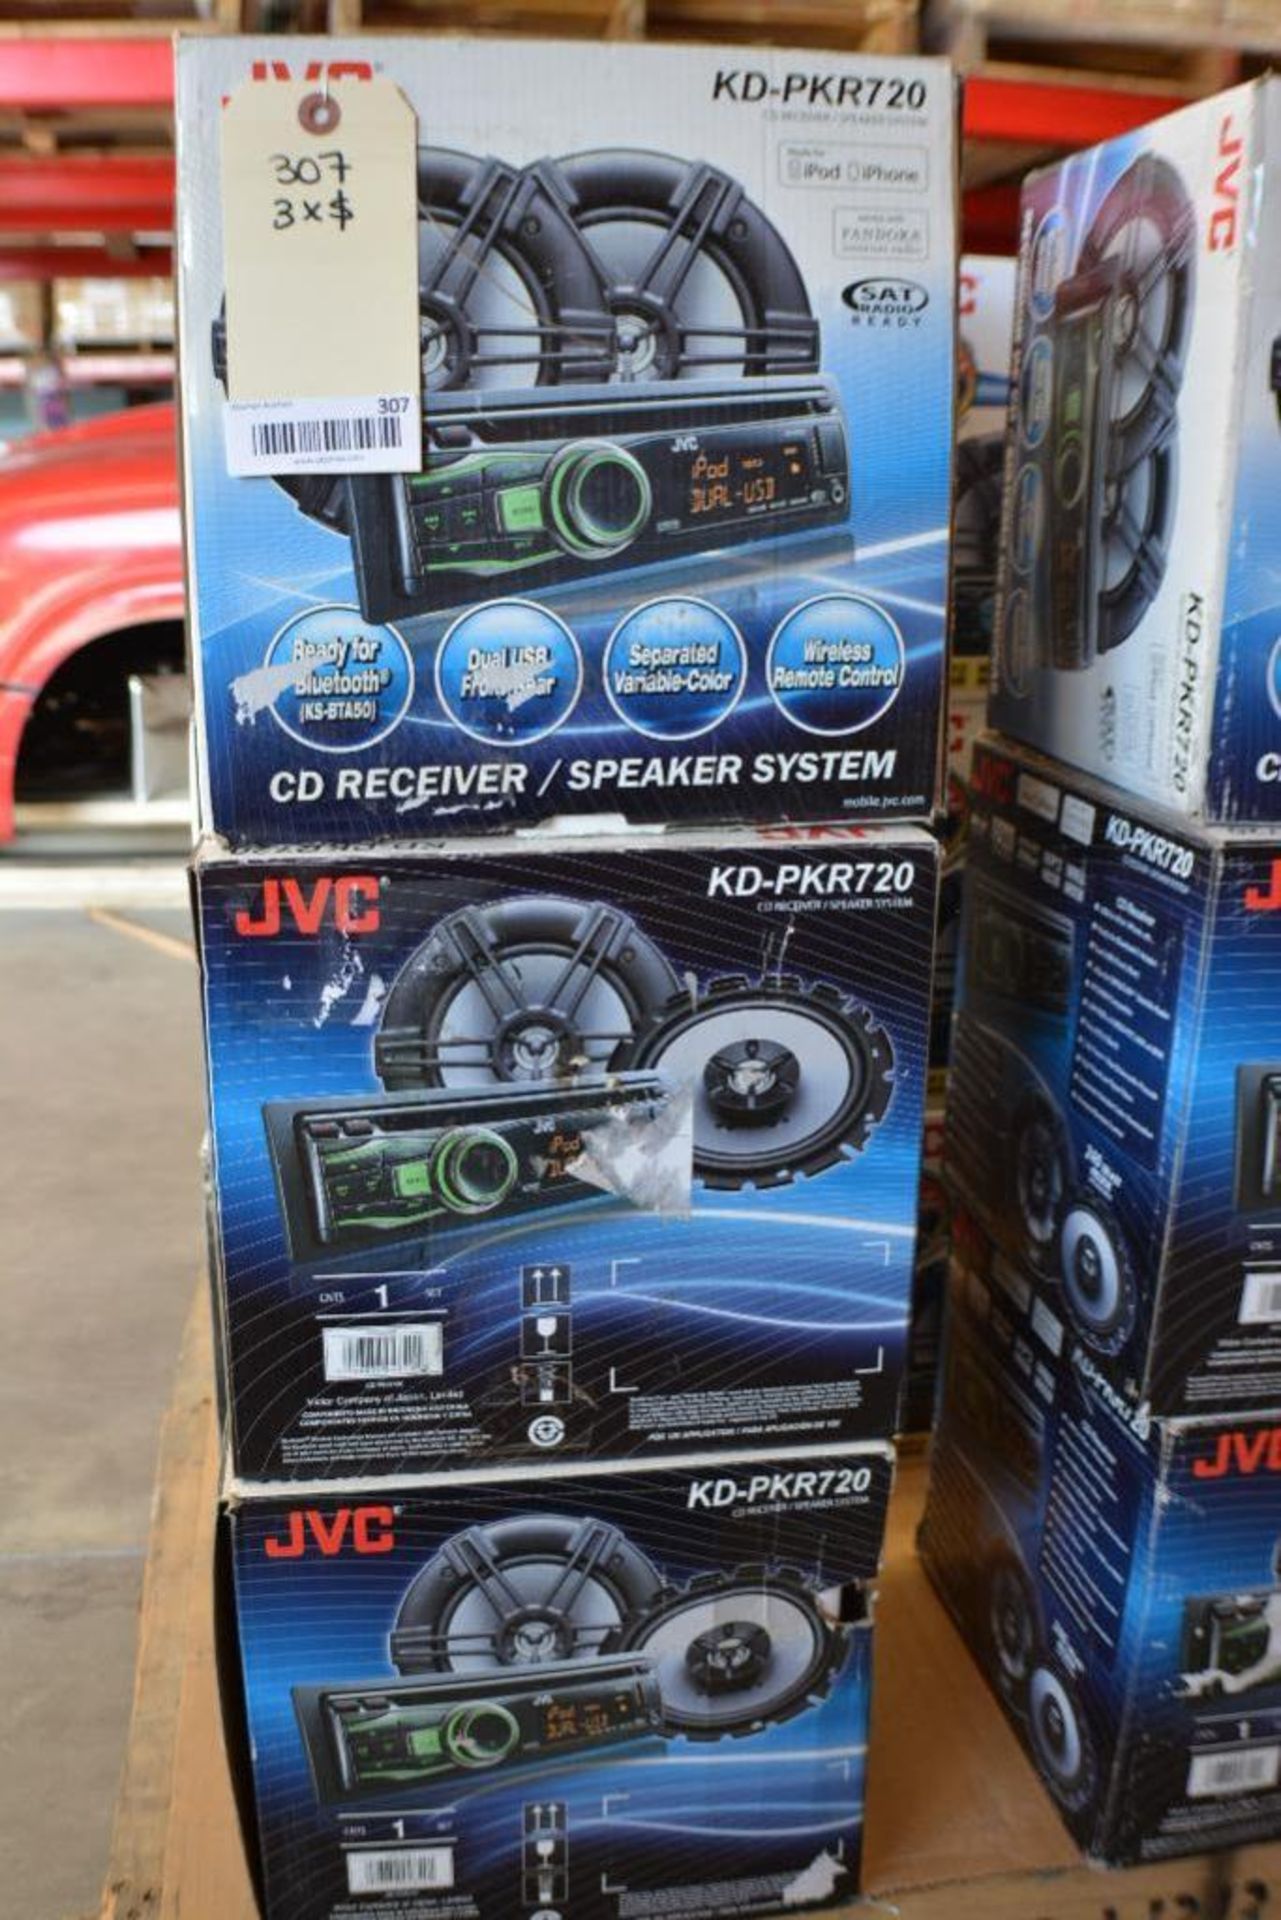 JVC Car Stereo Model KD-PKR720 In-Dash CD Receiver/Speaker System. Ready for Bluetooth + Dual USB +